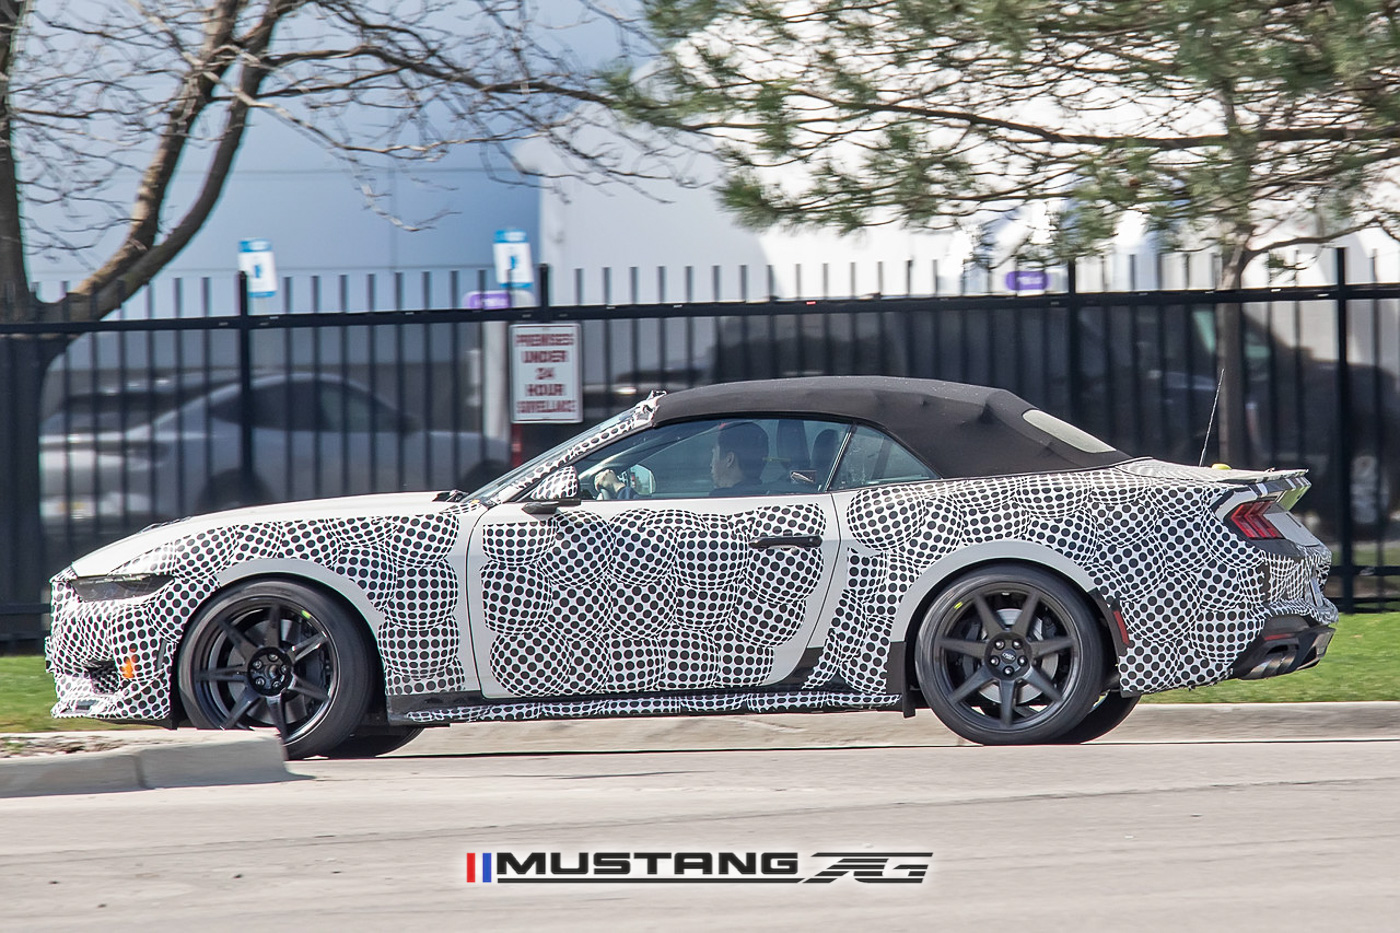 S650 Mustang 2026 Shelby GT500 Mustang Convertible Spied w/ Revised Grille, Carbon Fiber Wheels & Larger Global Market Side Mirrors 2026-shelby-gt500-mustang-convertible-prototype-spied-5